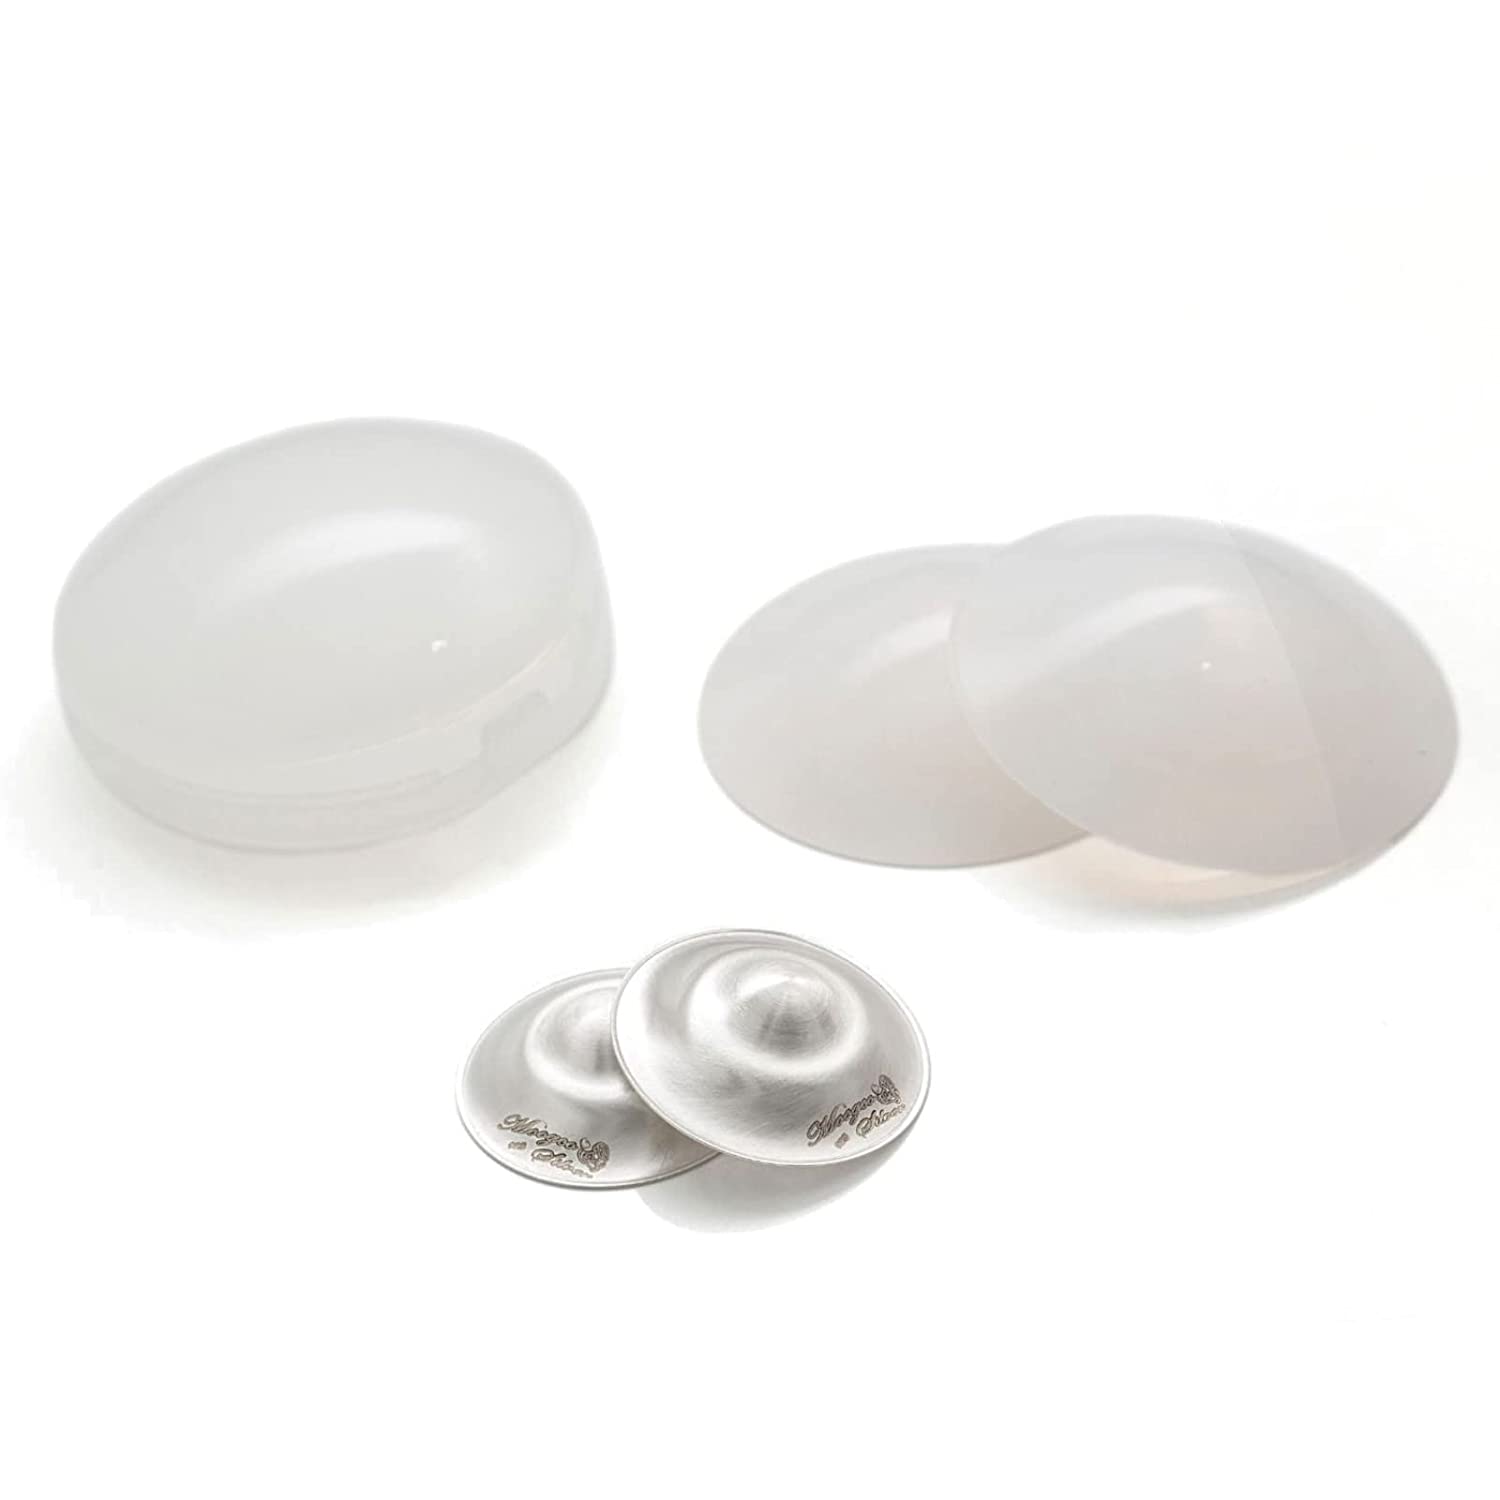 Silverette The Original Silver Nursing Cups - Soothe and Protect Your Nursing Nipples -Made in Italy